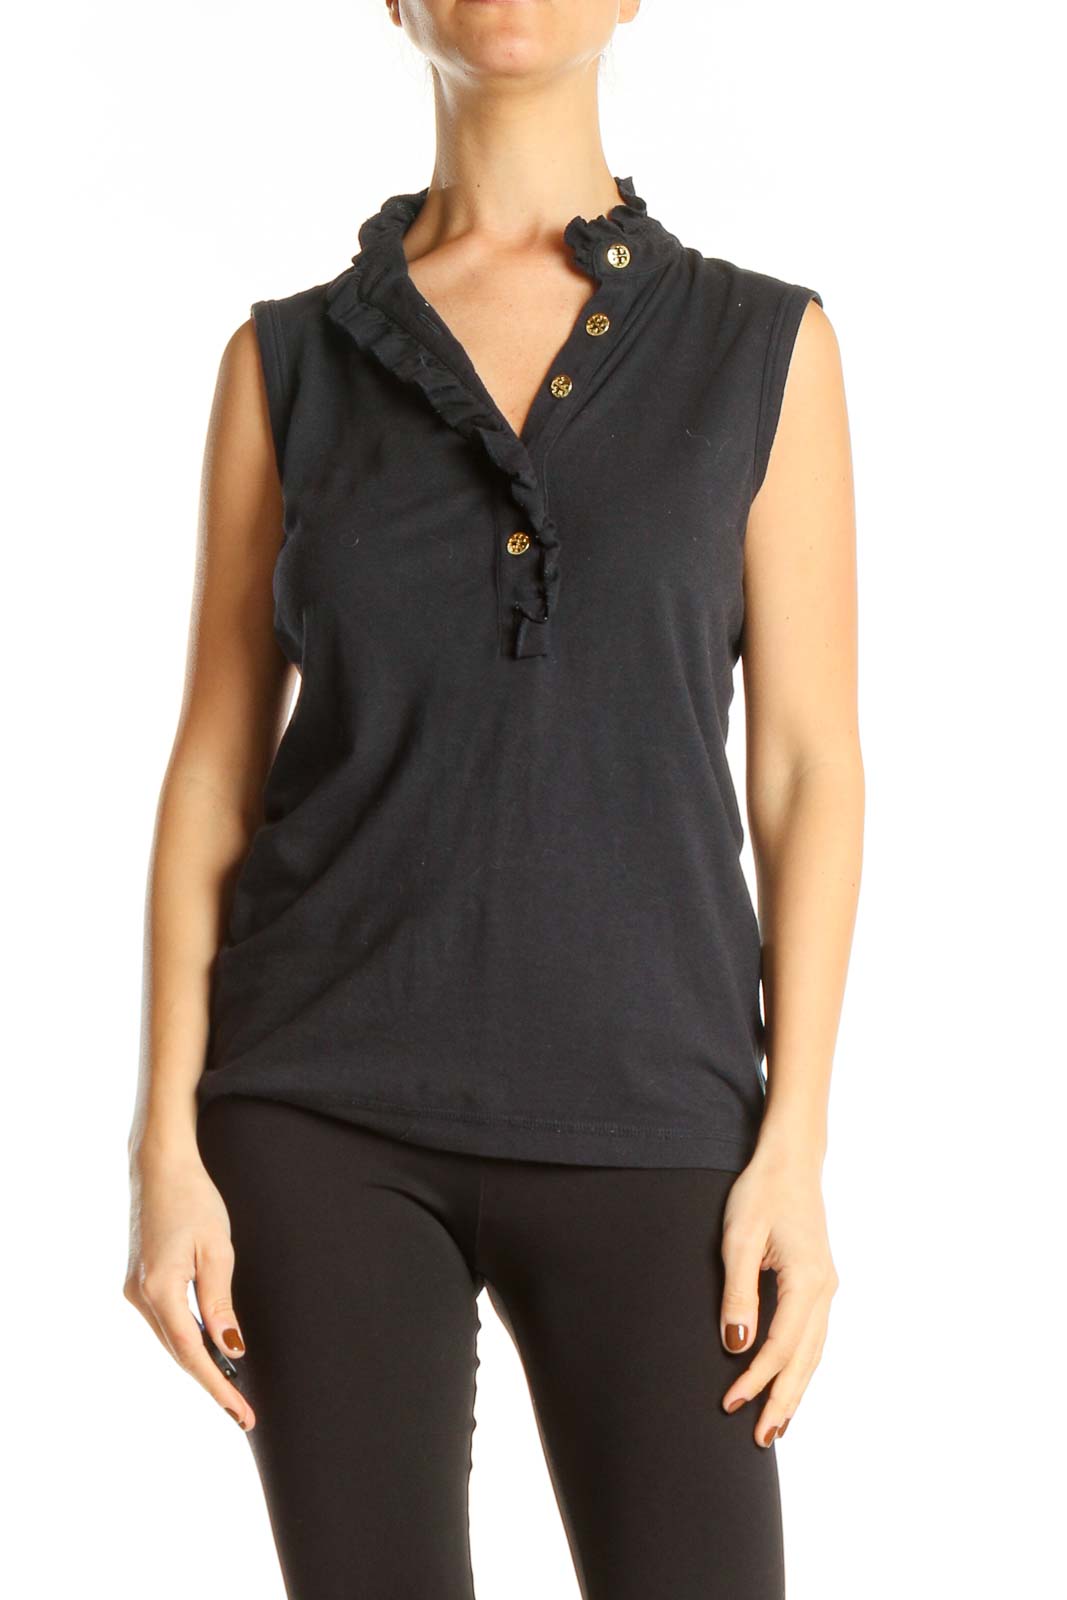 Black Chic Tank Top Front